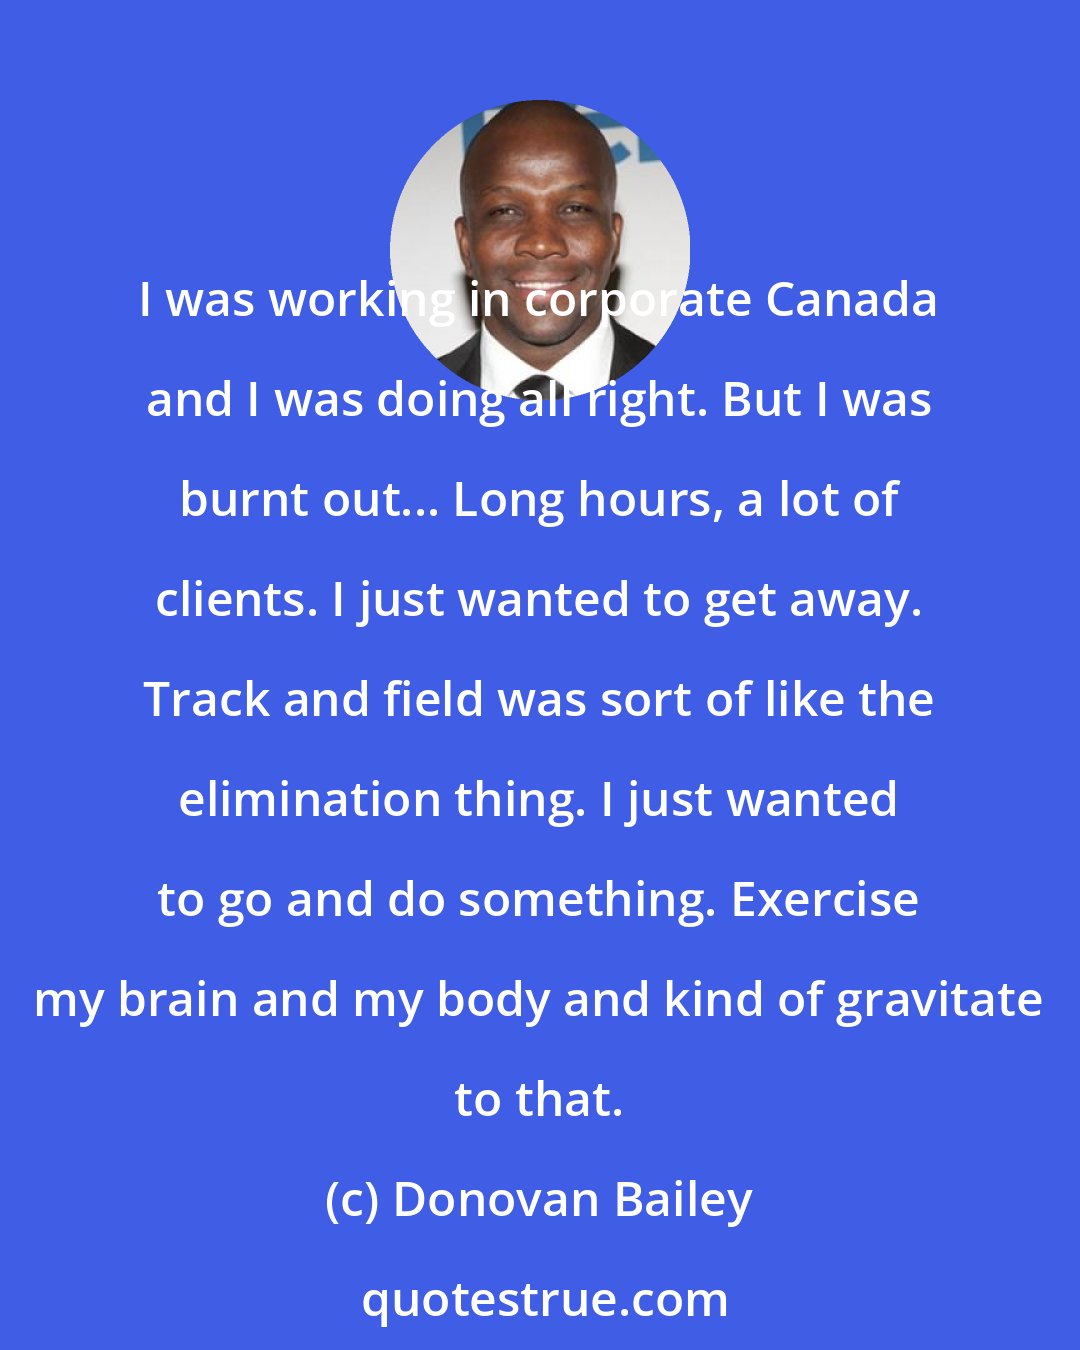 Donovan Bailey: I was working in corporate Canada and I was doing all right. But I was burnt out... Long hours, a lot of clients. I just wanted to get away. Track and field was sort of like the elimination thing. I just wanted to go and do something. Exercise my brain and my body and kind of gravitate to that.